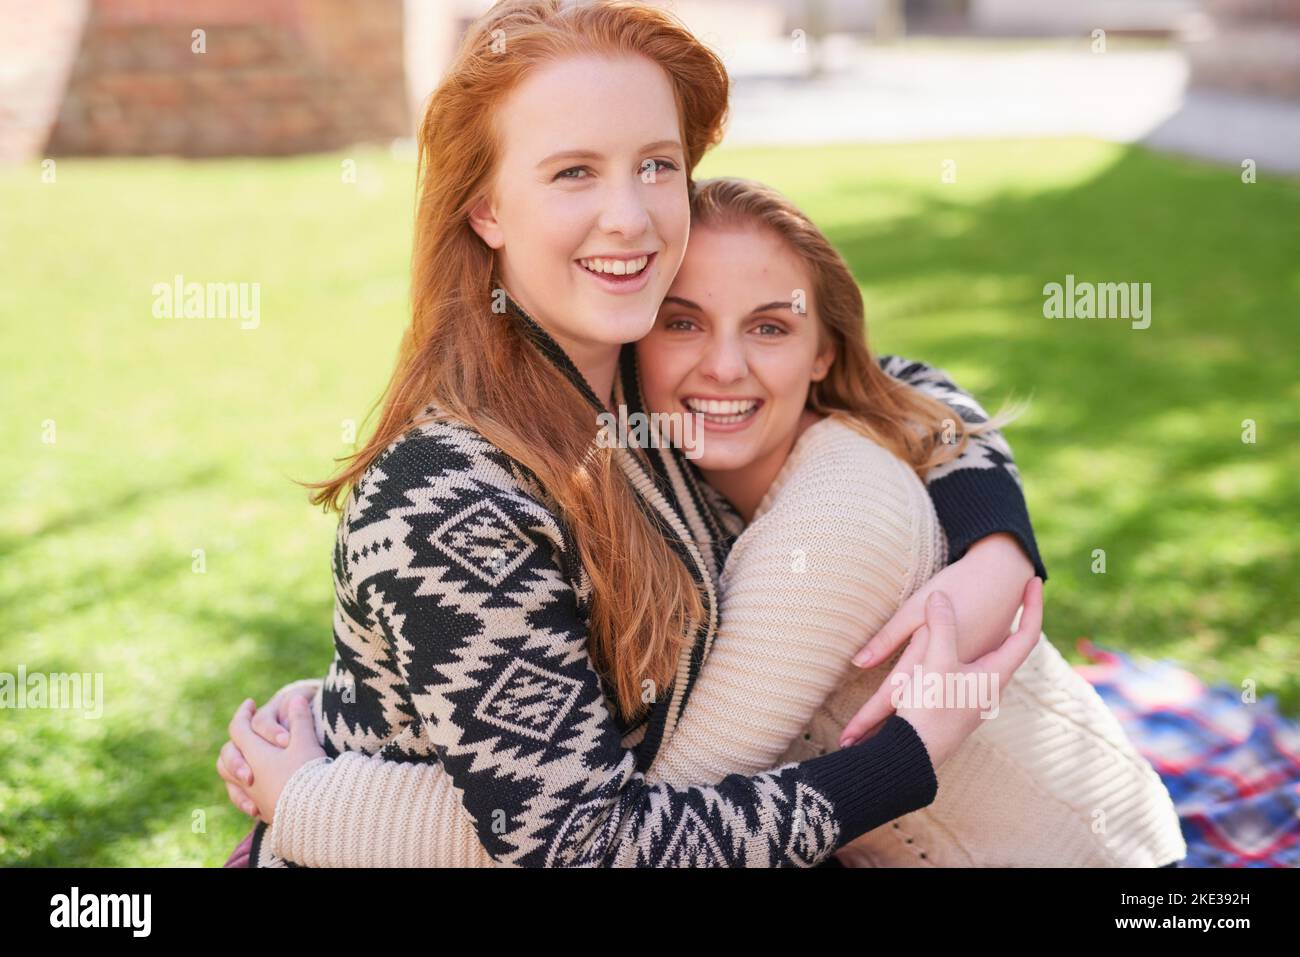 My bestie gives the best hugs ever. two happy friends hugging outdoors. Stock Photo